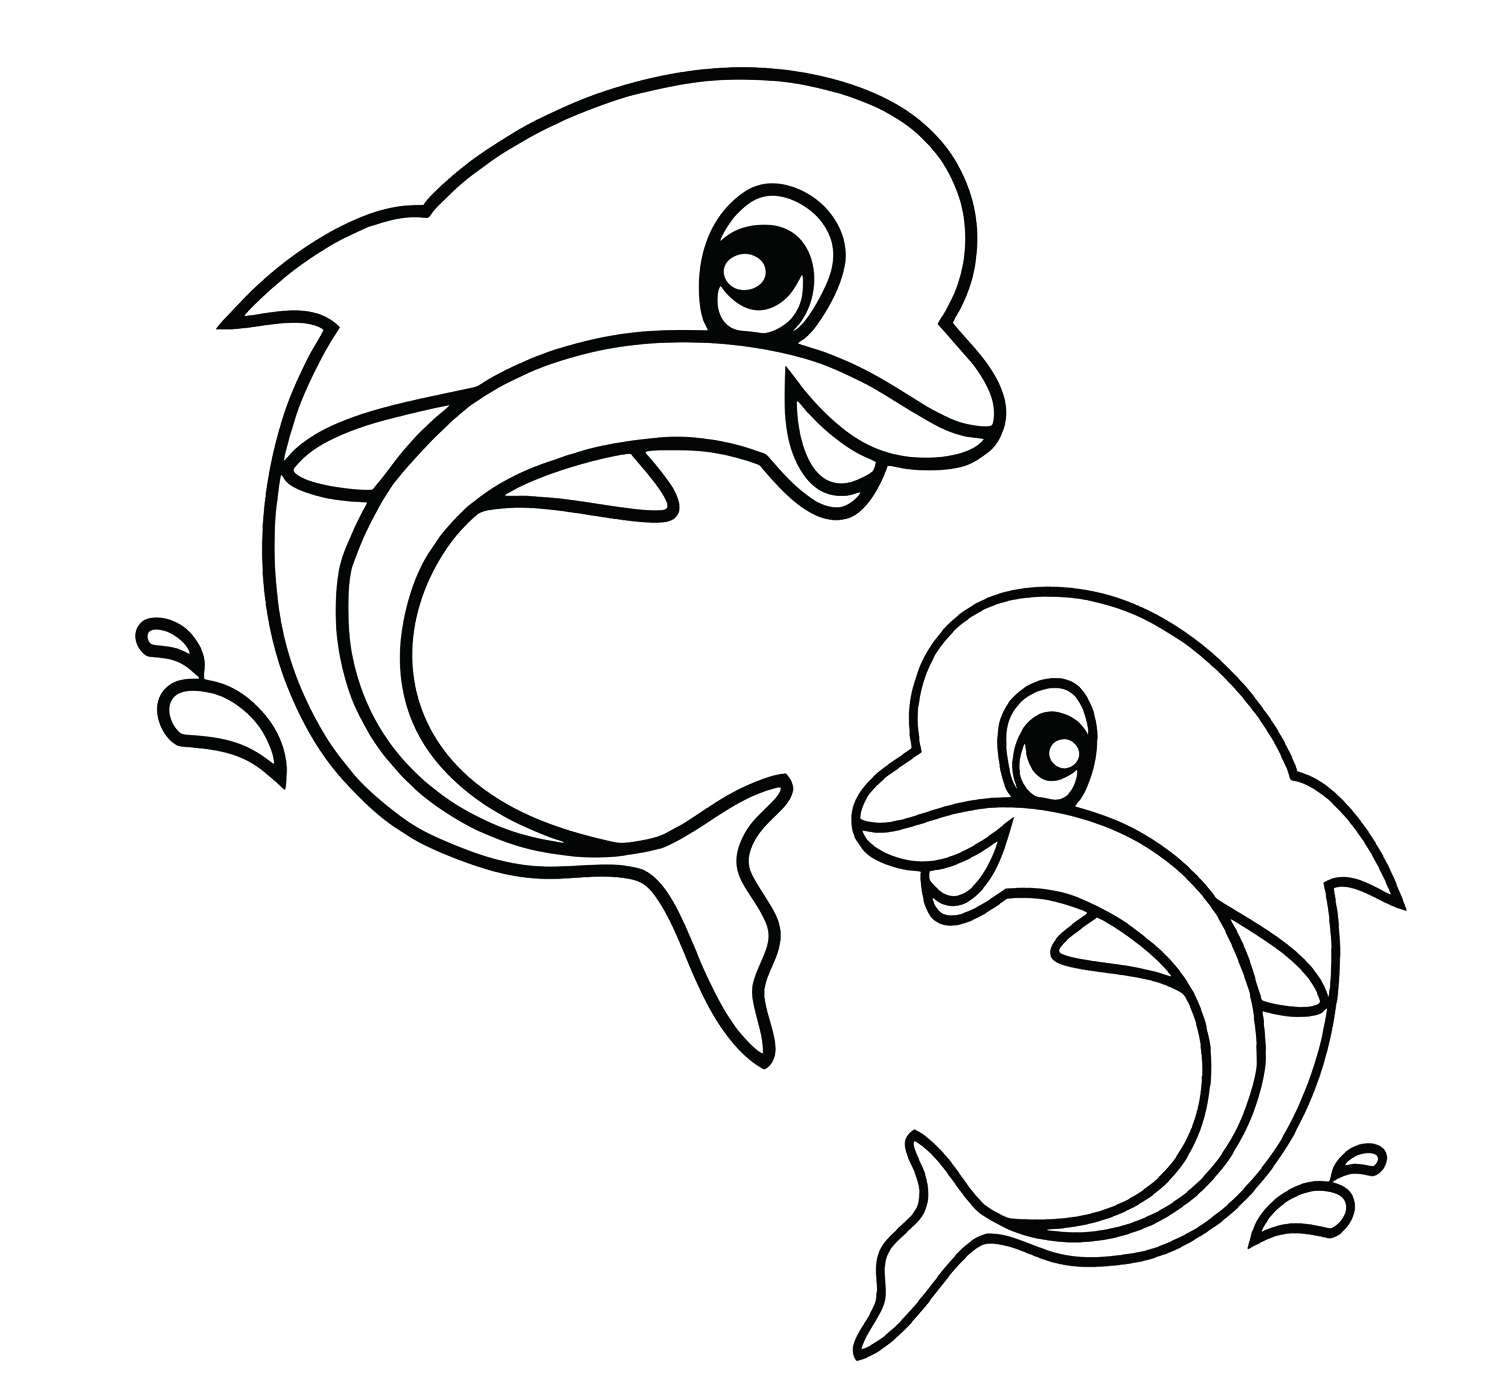 a coloring pages of animals - photo #15